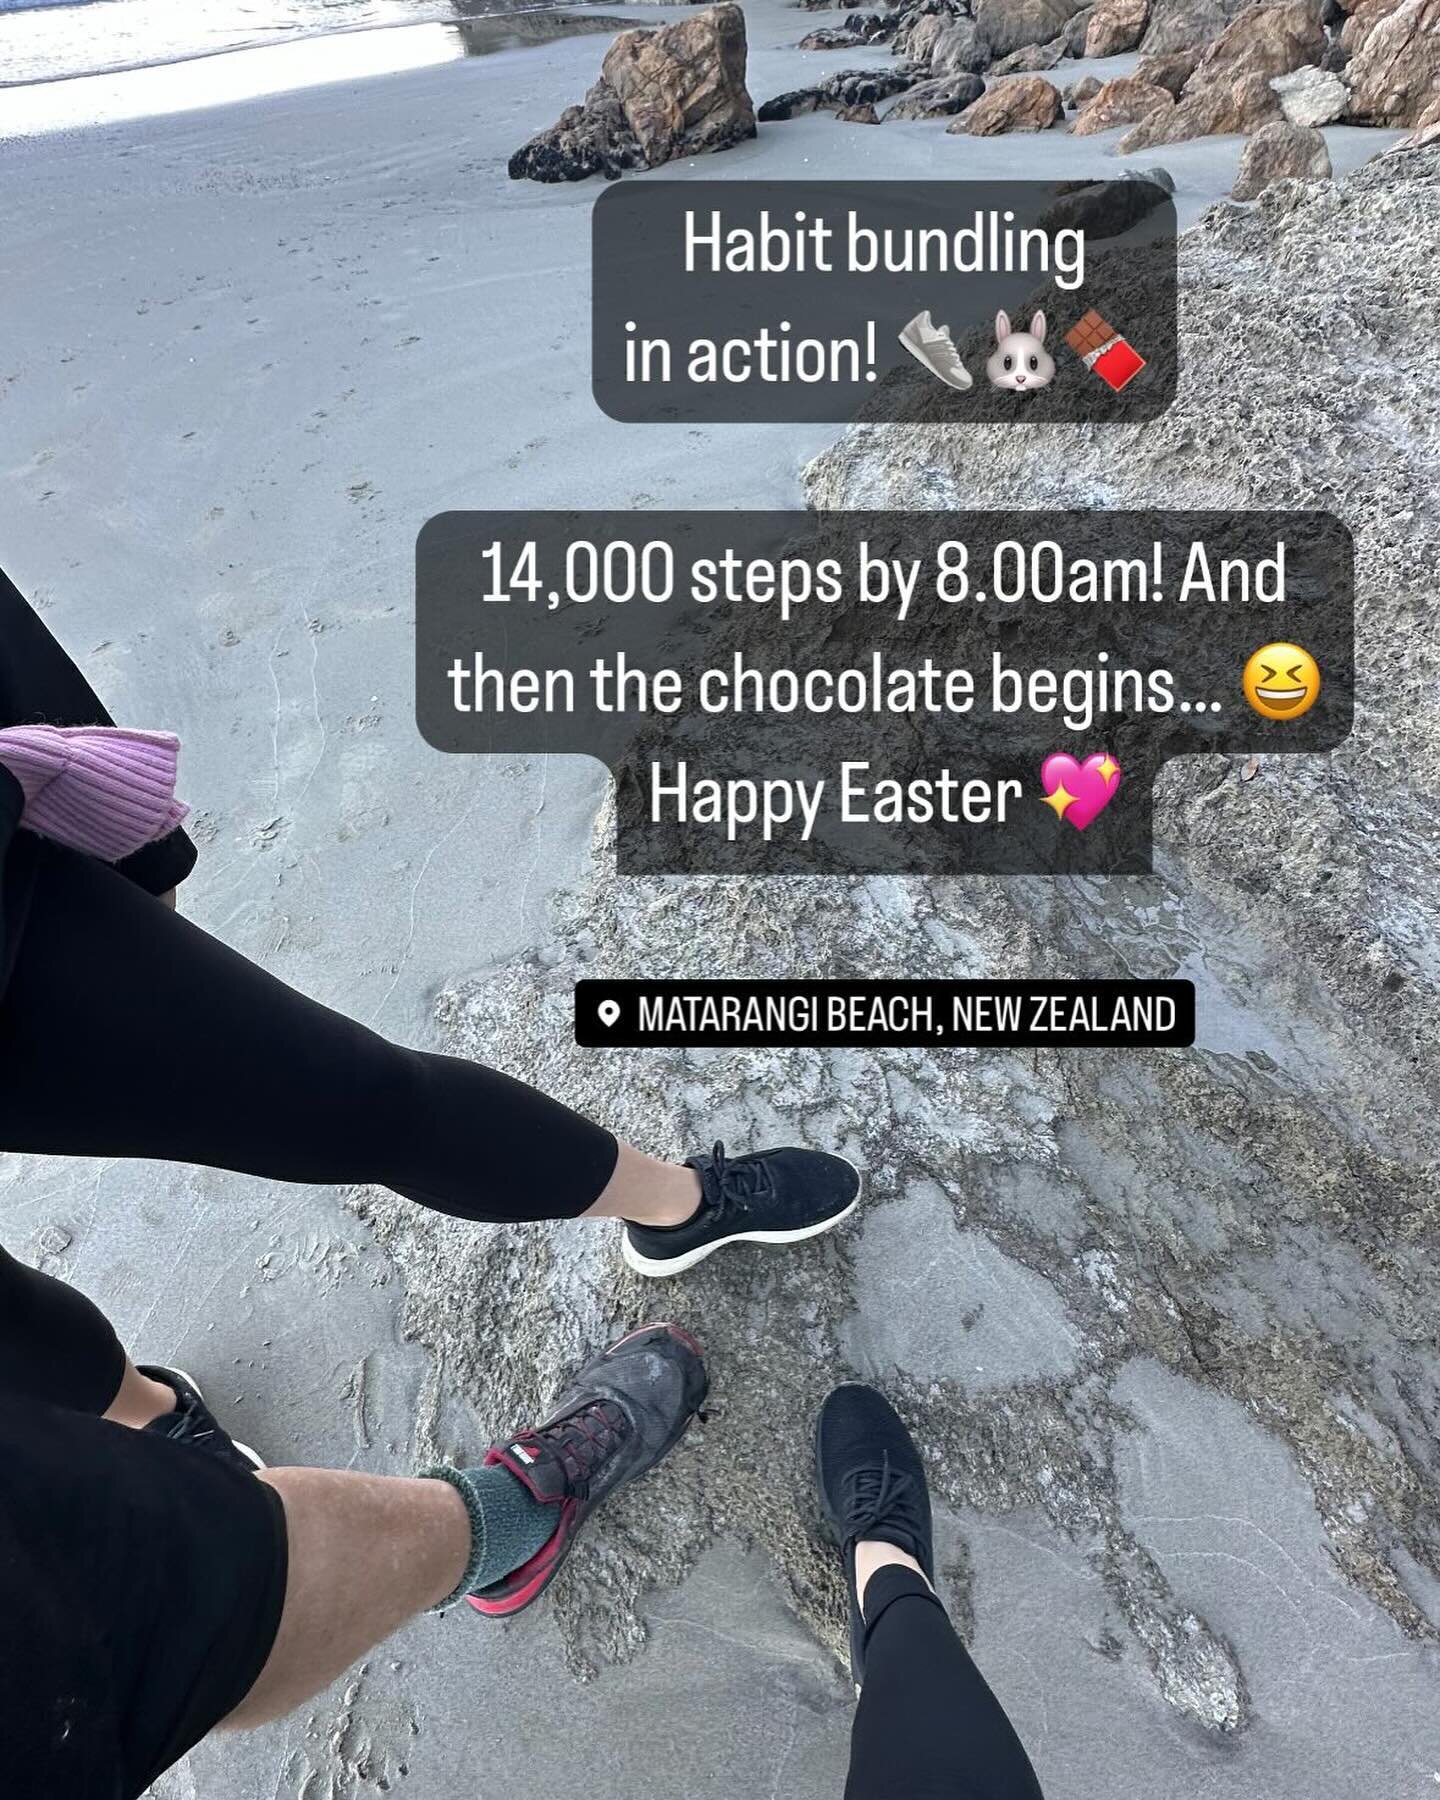 Habit bundling in action! 💥 Each year we smash out a huge beach walk before eating far too much chocolate and hot cross buns 😆 surely it balances itself out 🤷&zwj;♀️😉

Happy Easter from our hearts to yours 💖

#eastersunday #nourishingtraditions 